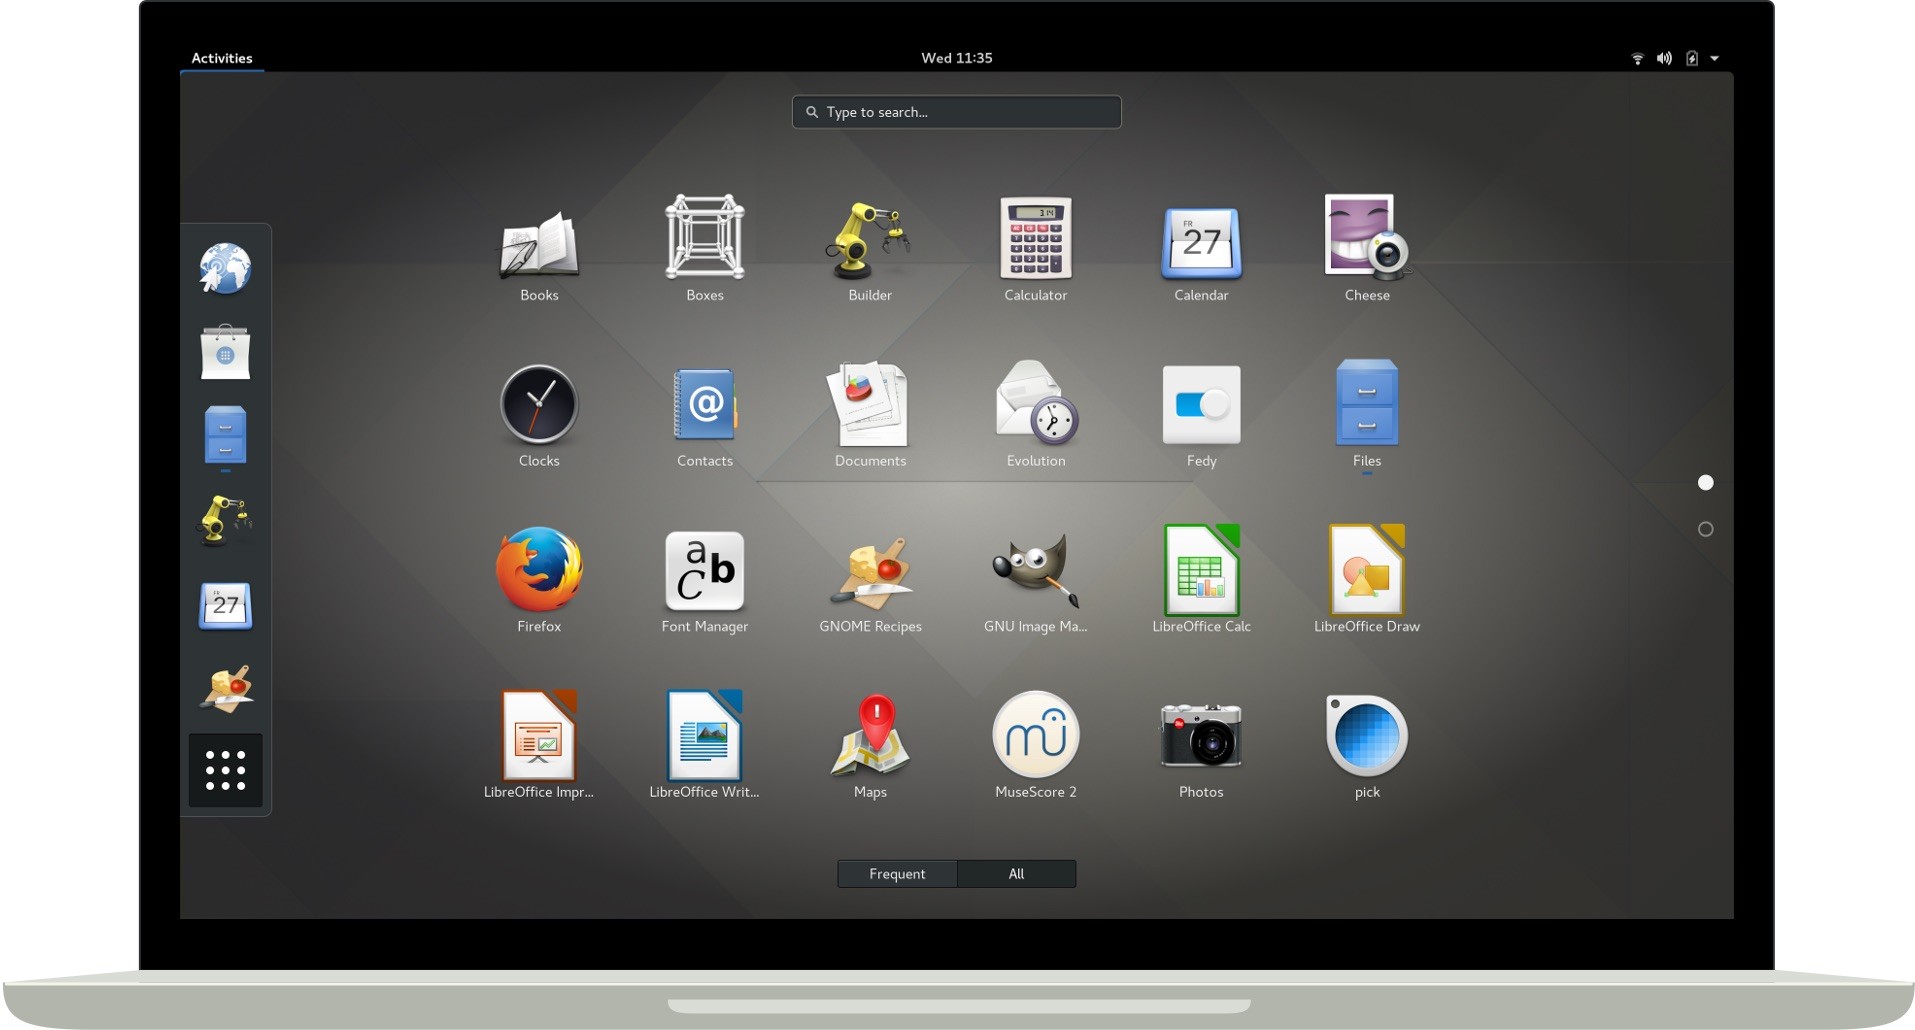 gnome-3-28-desktop-gets-first-point-release-it-s-ready-for-mass-deployment-520682-2.jpg